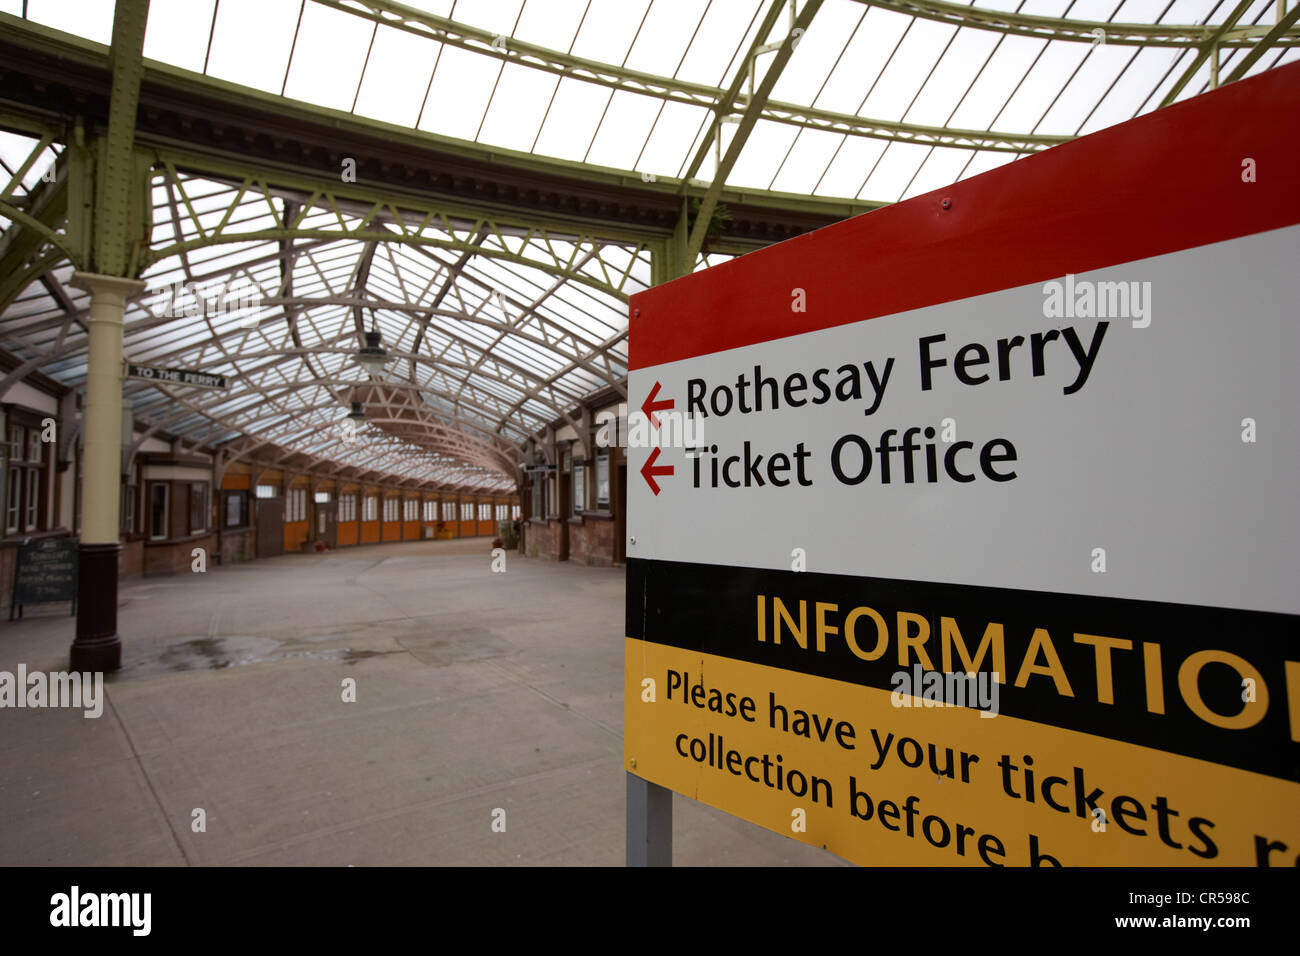 sign for the rothesay ferry and ticket office inside weymss bay railway station scotland uk Stock Photo